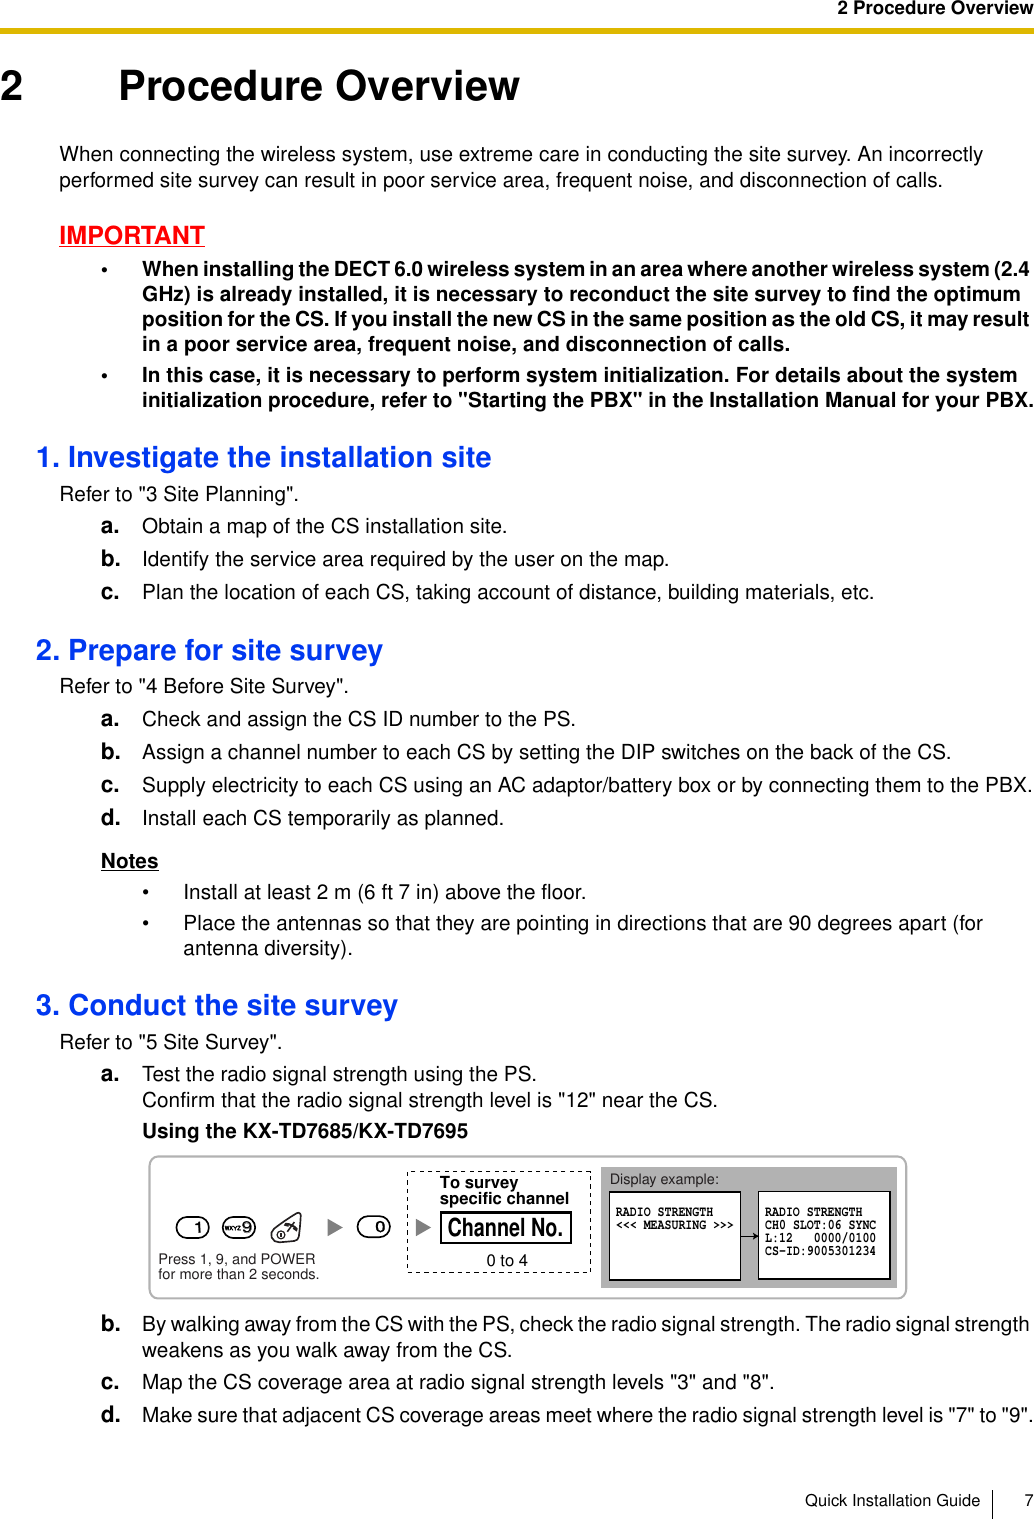 2 Procedure OverviewQuick Installation Guide 72 Procedure OverviewWhen connecting the wireless system, use extreme care in conducting the site survey. An incorrectly performed site survey can result in poor service area, frequent noise, and disconnection of calls.IMPORTANT• When installing the DECT 6.0 wireless system in an area where another wireless system (2.4 GHz) is already installed, it is necessary to reconduct the site survey to find the optimum position for the CS. If you install the new CS in the same position as the old CS, it may result in a poor service area, frequent noise, and disconnection of calls.• In this case, it is necessary to perform system initialization. For details about the system initialization procedure, refer to &quot;Starting the PBX&quot; in the Installation Manual for your PBX.1. Investigate the installation siteRefer to &quot;3 Site Planning&quot;.a. Obtain a map of the CS installation site.b. Identify the service area required by the user on the map.c. Plan the location of each CS, taking account of distance, building materials, etc.2. Prepare for site surveyRefer to &quot;4 Before Site Survey&quot;.a. Check and assign the CS ID number to the PS.b. Assign a channel number to each CS by setting the DIP switches on the back of the CS.c. Supply electricity to each CS using an AC adaptor/battery box or by connecting them to the PBX.d. Install each CS temporarily as planned.Notes• Install at least 2 m (6 ft 7 in) above the floor.• Place the antennas so that they are pointing in directions that are 90 degrees apart (for antenna diversity).3. Conduct the site surveyRefer to &quot;5 Site Survey&quot;.a. Test the radio signal strength using the PS.Confirm that the radio signal strength level is &quot;12&quot; near the CS.Using the KX-TD7685/KX-TD7695b. By walking away from the CS with the PS, check the radio signal strength. The radio signal strength weakens as you walk away from the CS.c. Map the CS coverage area at radio signal strength levels &quot;3&quot; and &quot;8&quot;.d. Make sure that adjacent CS coverage areas meet where the radio signal strength level is &quot;7&quot; to &quot;9&quot;.Display example:RADIO STRENGTH&lt;&lt;&lt; MEASURING &gt;&gt;&gt; RADIO STRENGTHCH0 SLOT:06 SYNCL:12   0000/0100CS-ID:9005301234Press 1, 9, and POWERfor more than 2 seconds.19900 to 4Channel No.To surveyspecific channel